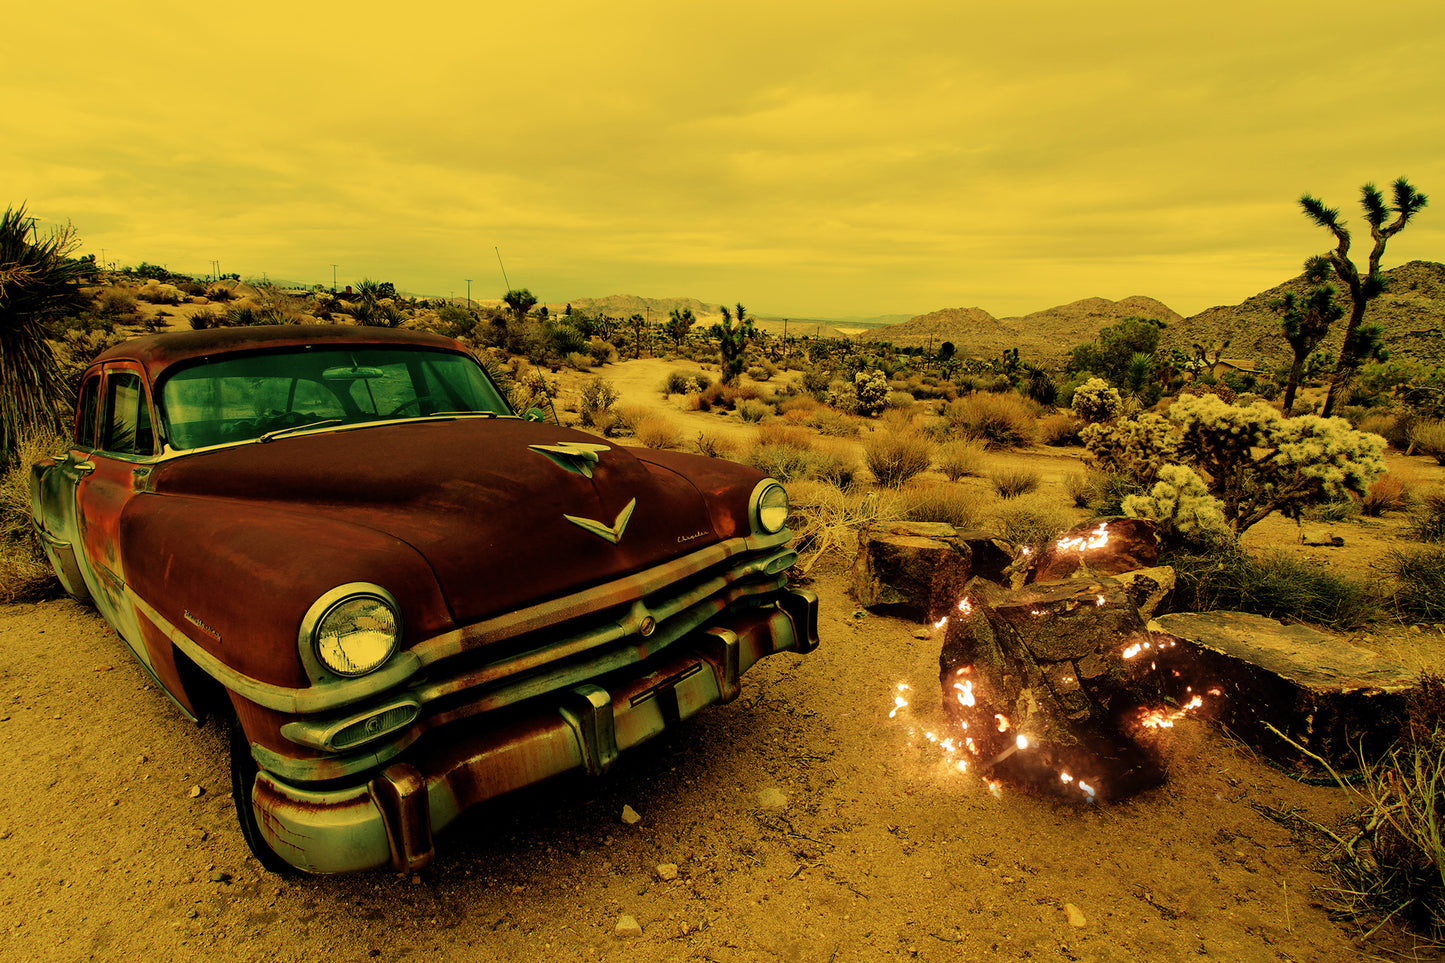 "Light Theory #5" by Shannon Black is a fine art photograph that transports viewers into a realm where light, texture, and history converge in the mesmerizing landscape of the Joshua Tree desert. The image presents a juxtaposition of elements, with a rusted vintage Chrysler in the foreground and sparks overlaying a rock, creating an ethereal atmosphere that sparks contemplation and imagination.